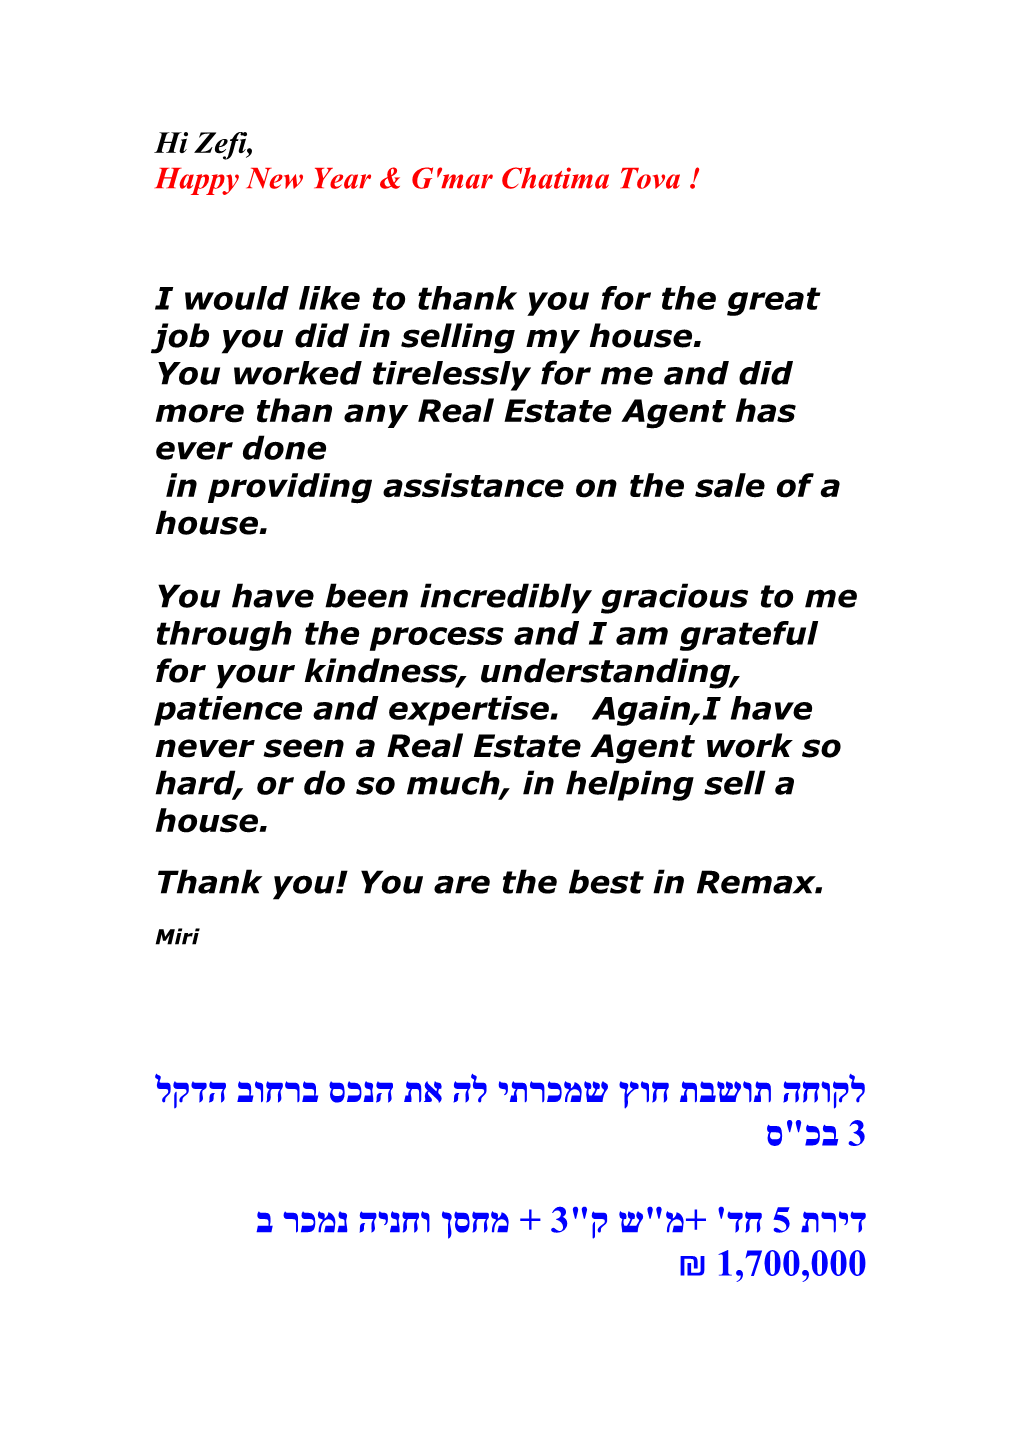 Thank You! You Are the Best in Remax